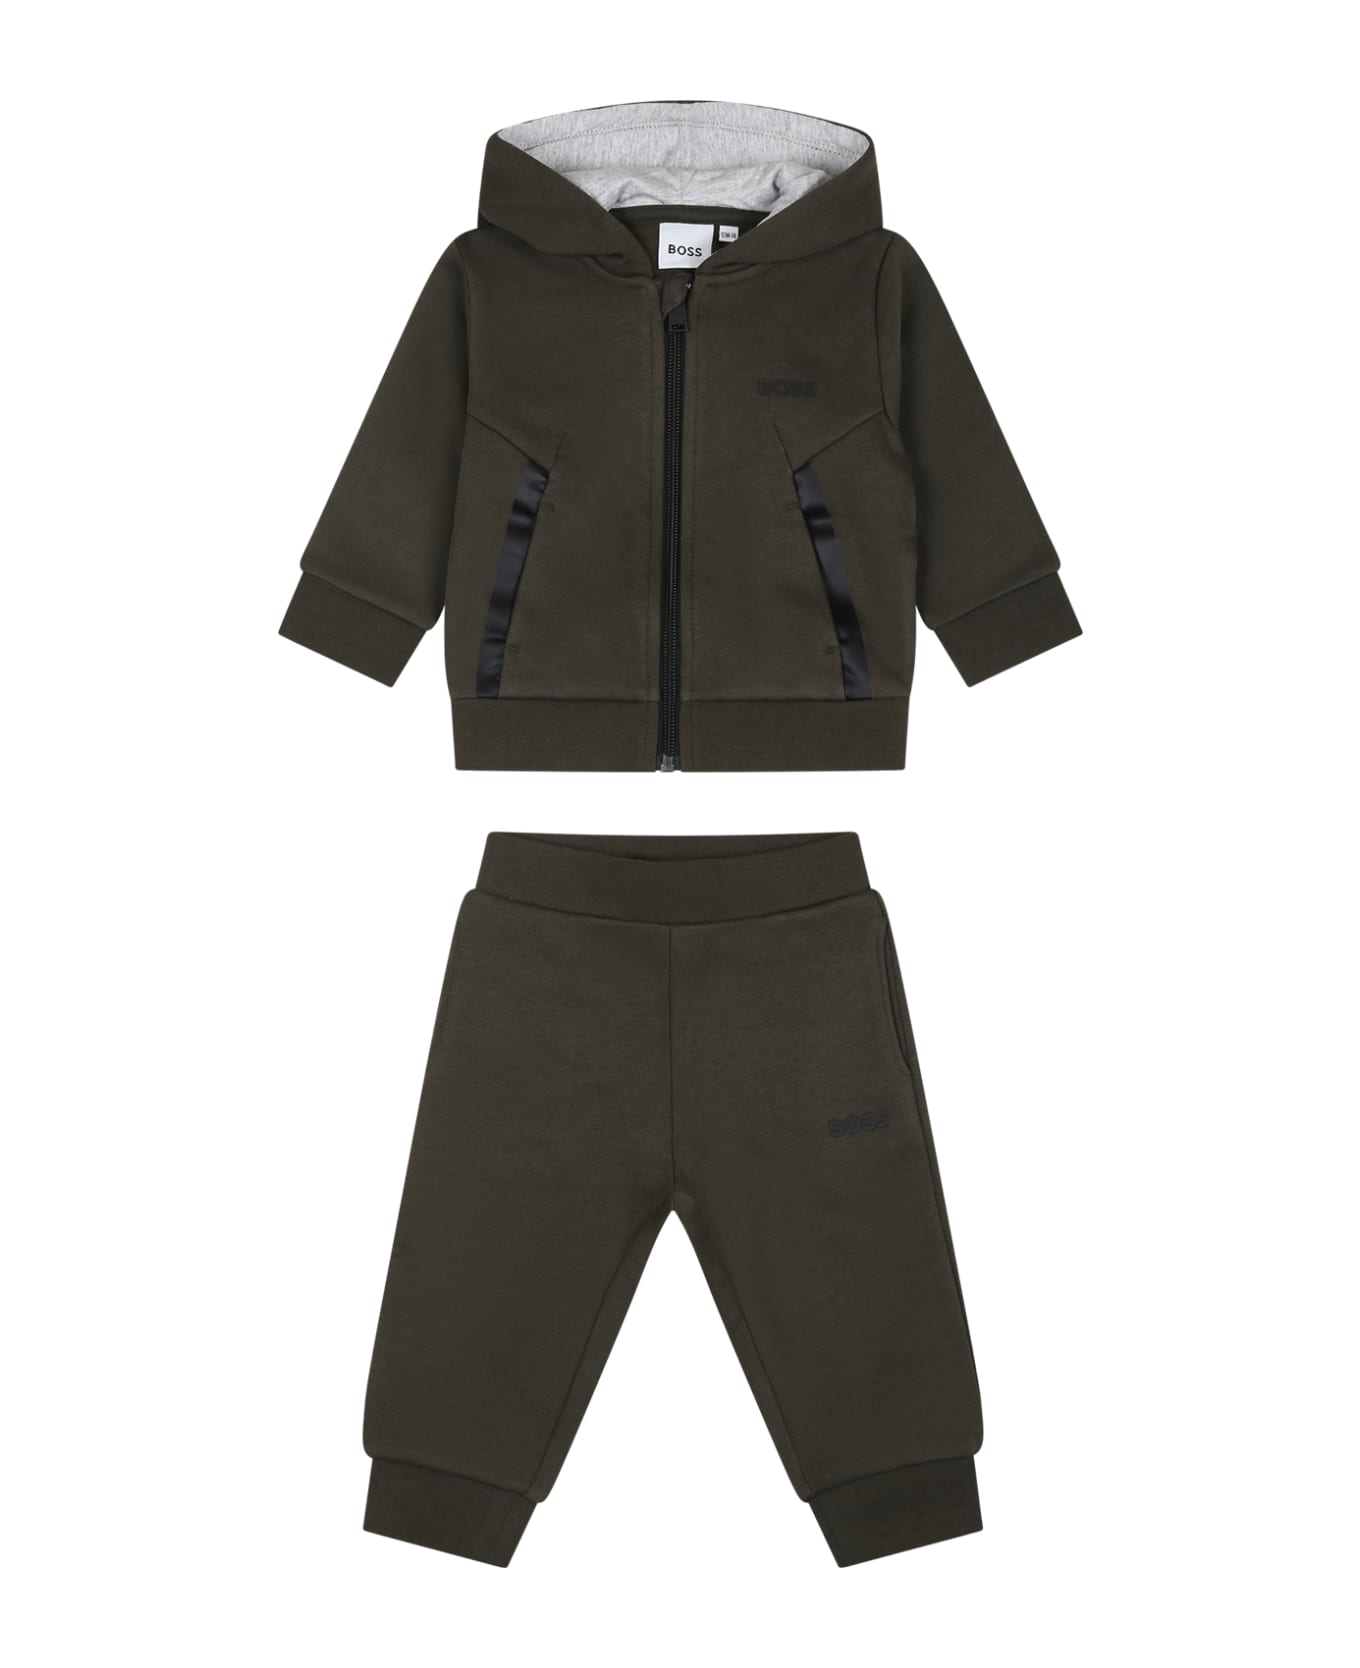 Hugo Boss Green Suit For Baby Boy With Logo - Green ボトムス